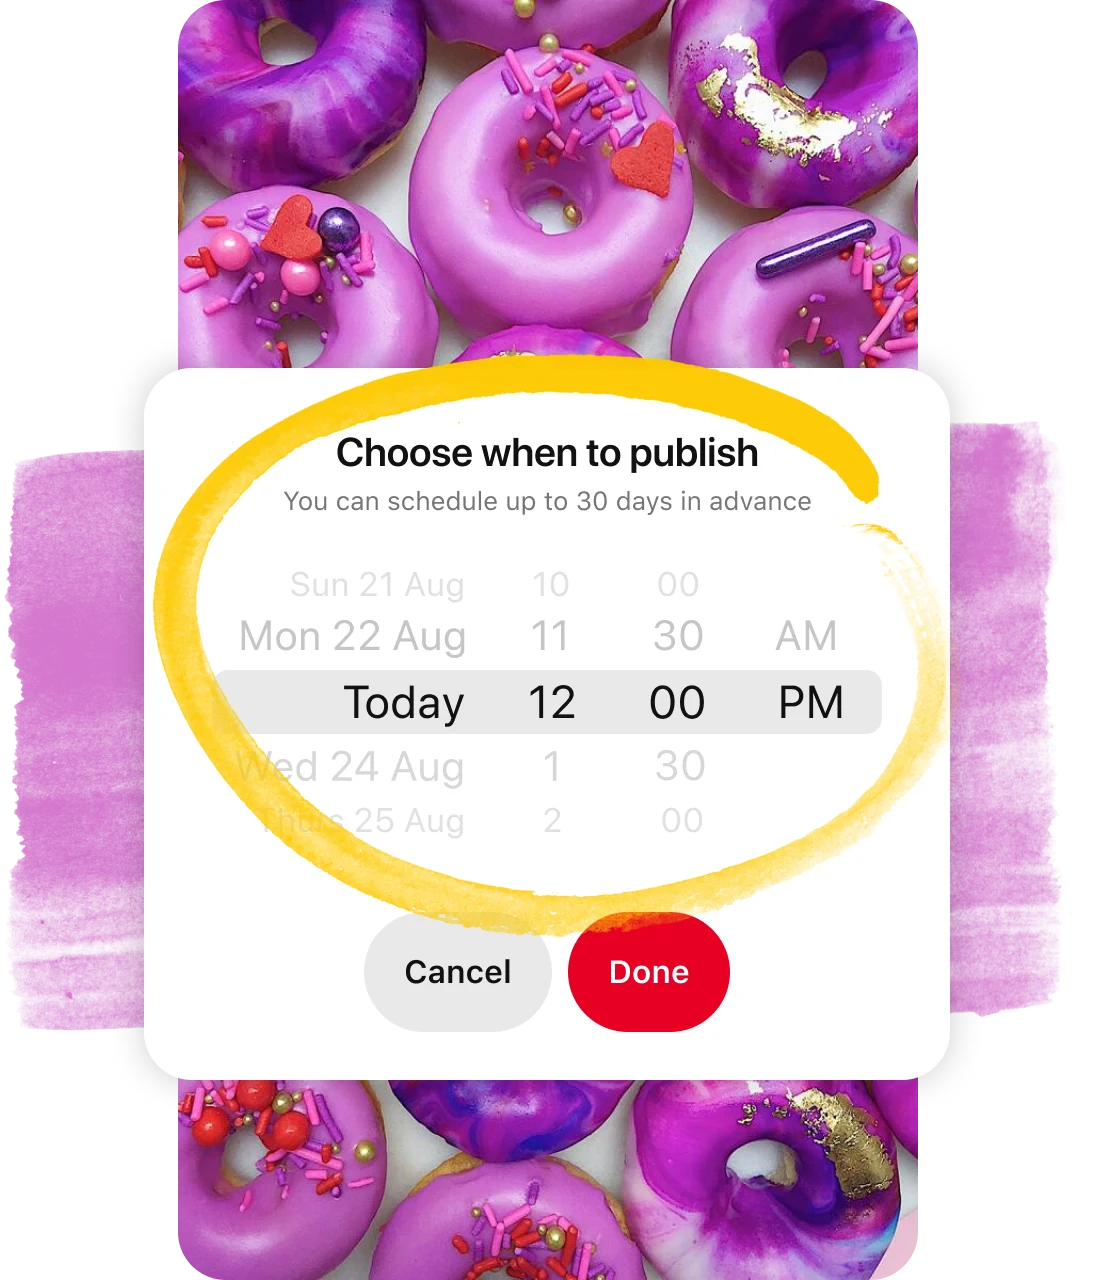 Snapshot of a Pin board scheduler circled in yellow overlaid on a Pin of purple doughnuts